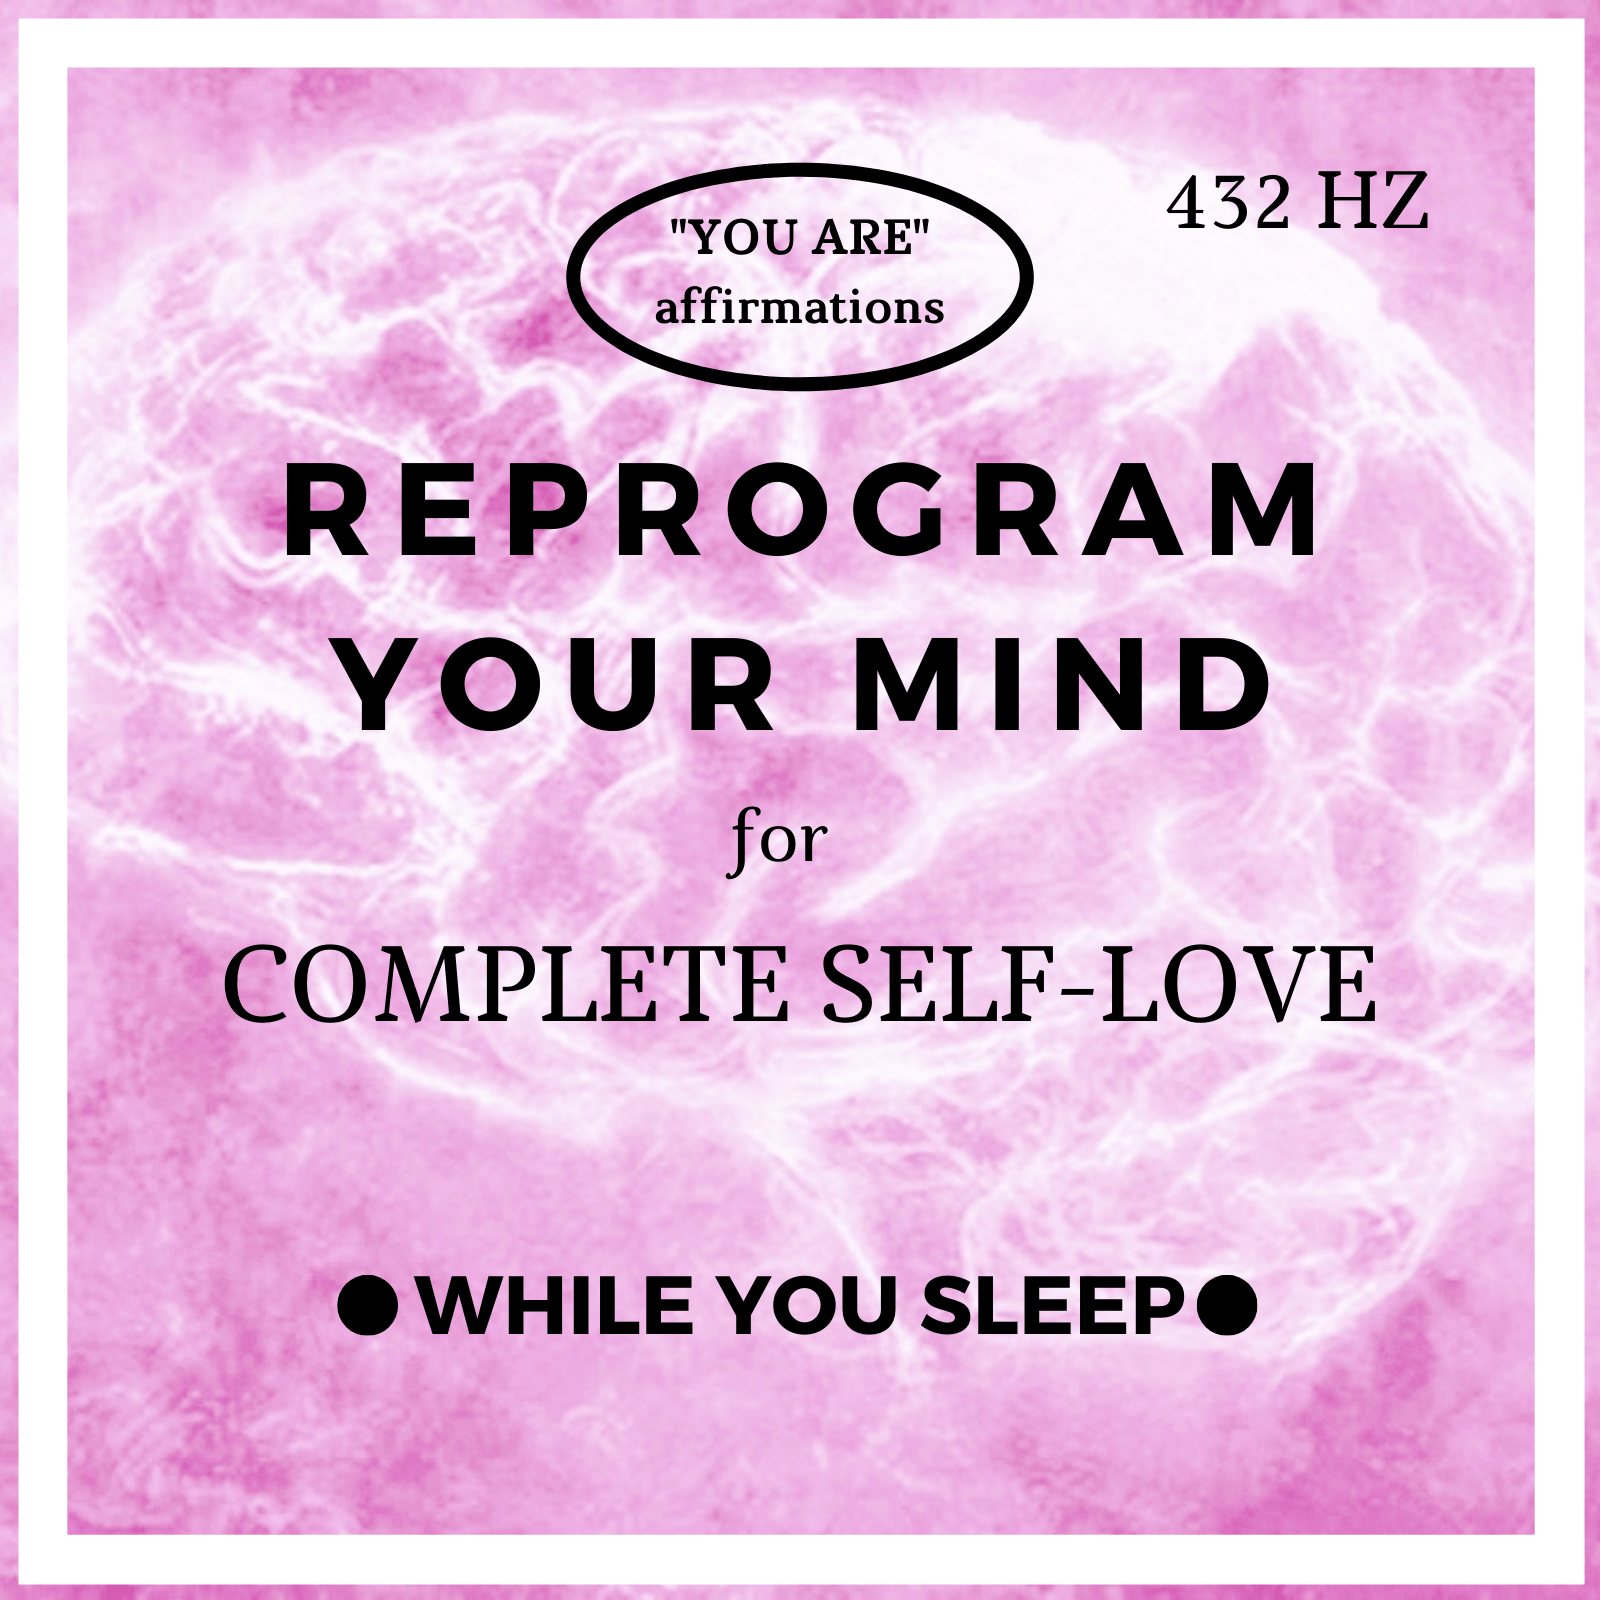 You Are Affirmations for SELF LOVE - Reprogram Your Mind (While You Sleep)